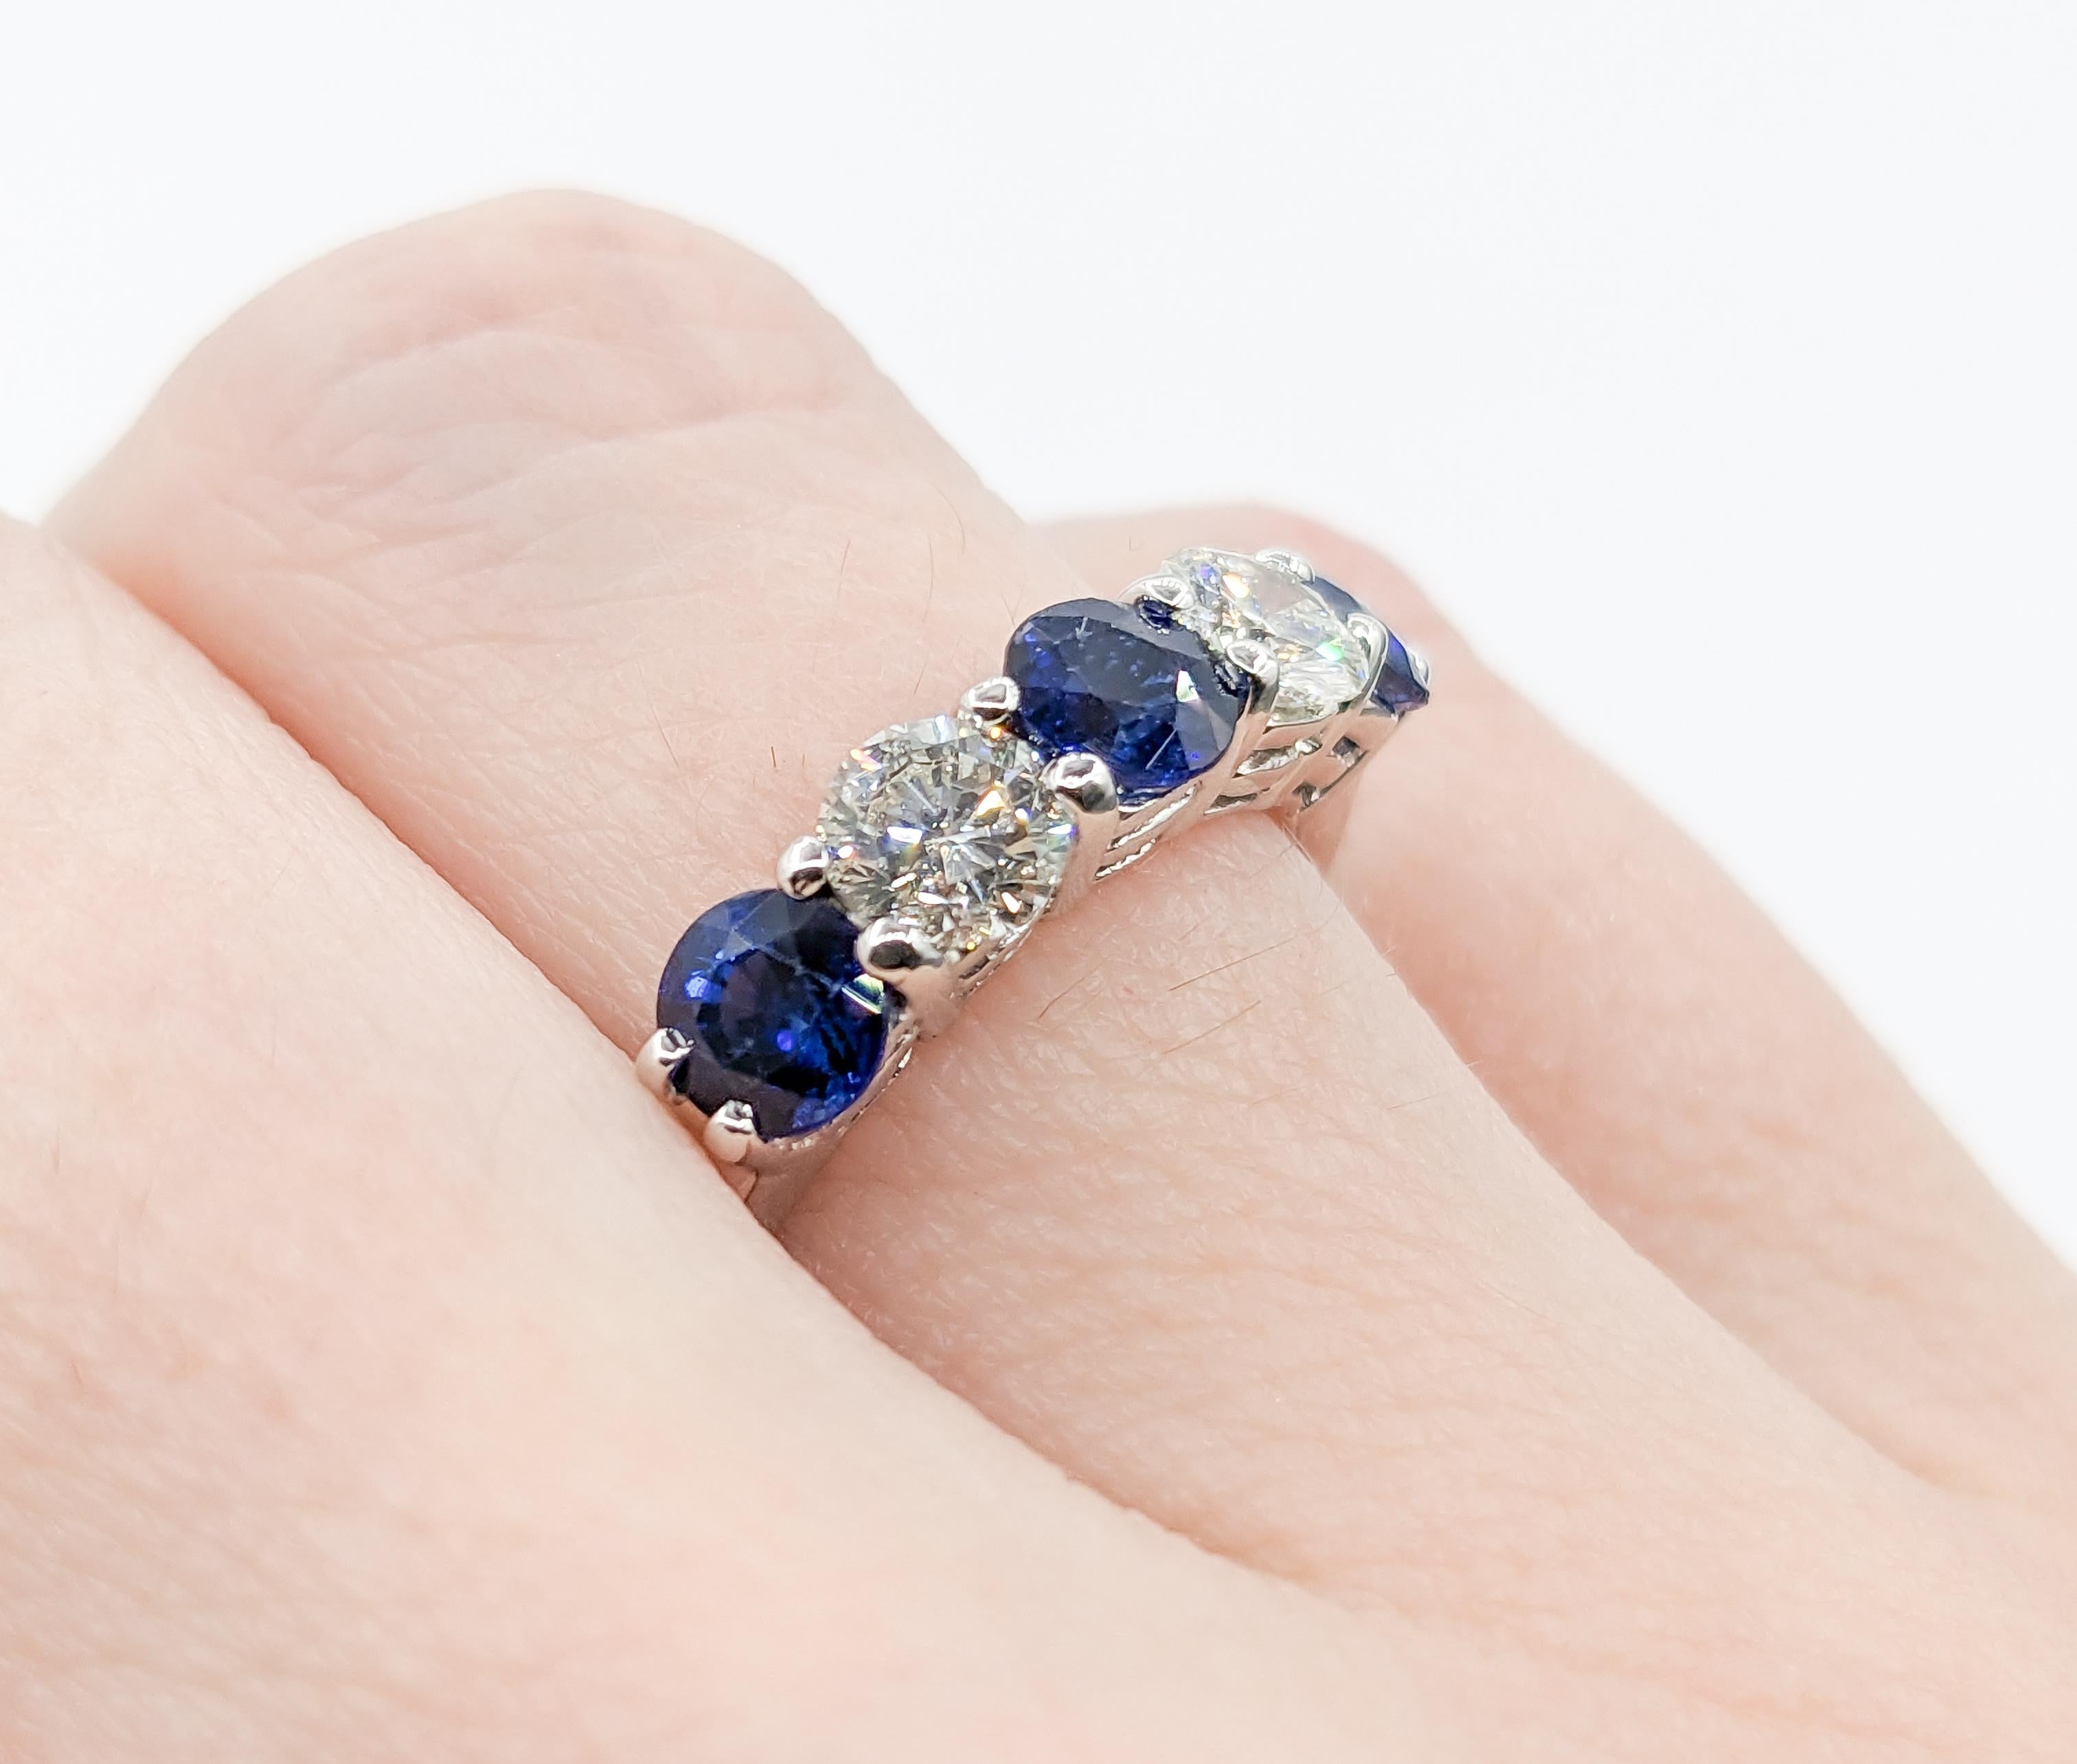 Diamond & Blue Sapphire Ring in Platinum In Excellent Condition For Sale In Bloomington, MN